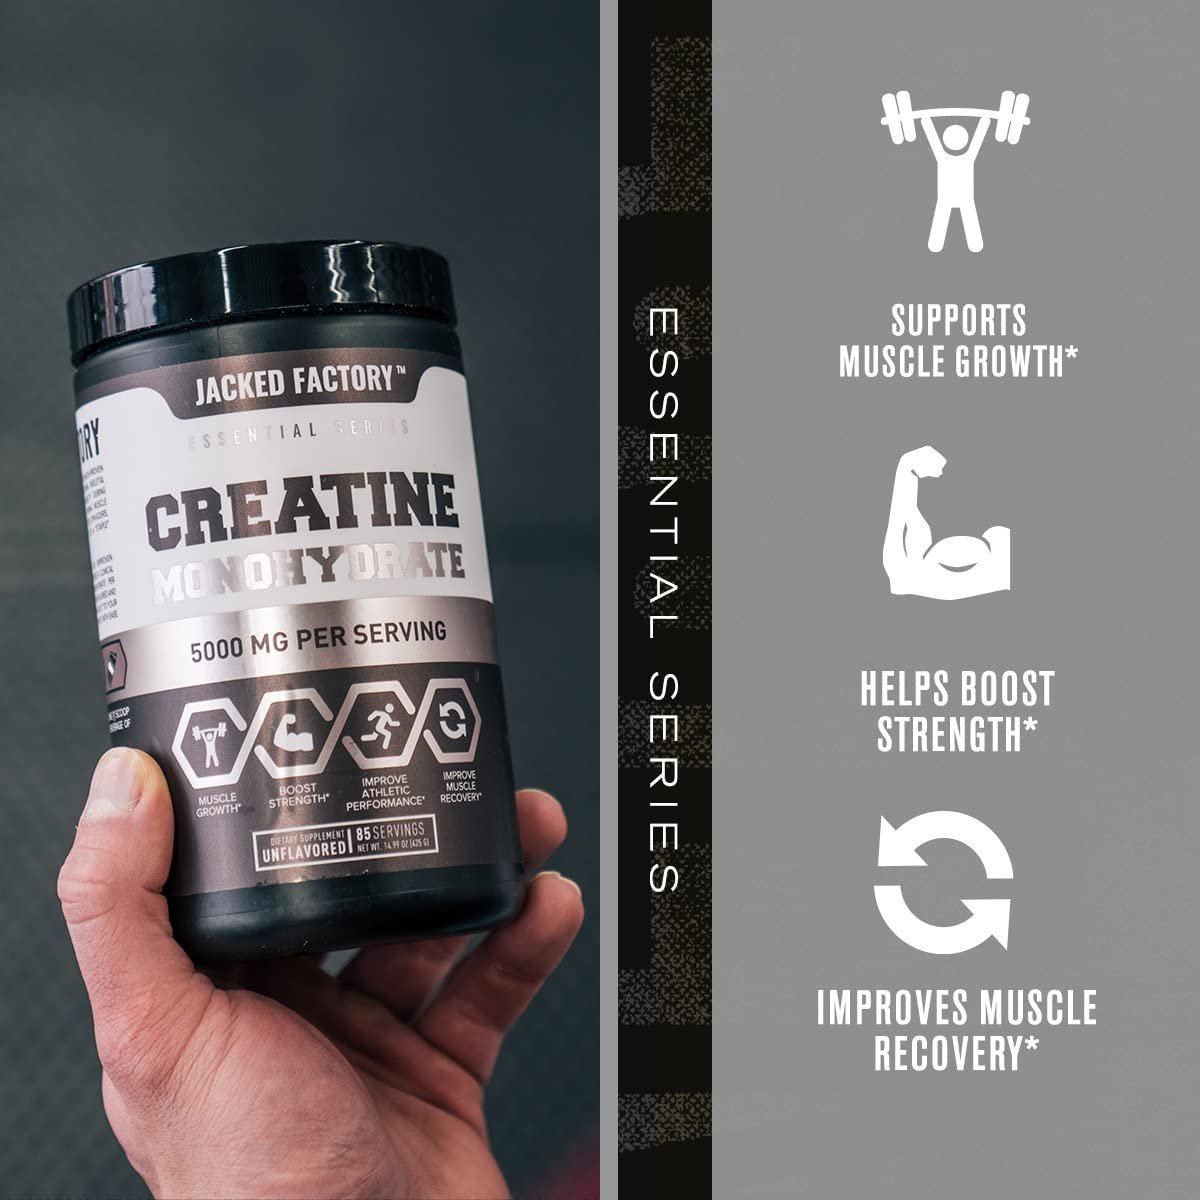 Nitrosurge Pre-Workout & Creatine Monohydrate - Pre Workout Powder With Creatine for Muscle Growth, Increased Strength, Endless Energy, Intense Pumps - Cherry Limeade Preworkout & Unflavored Creatine